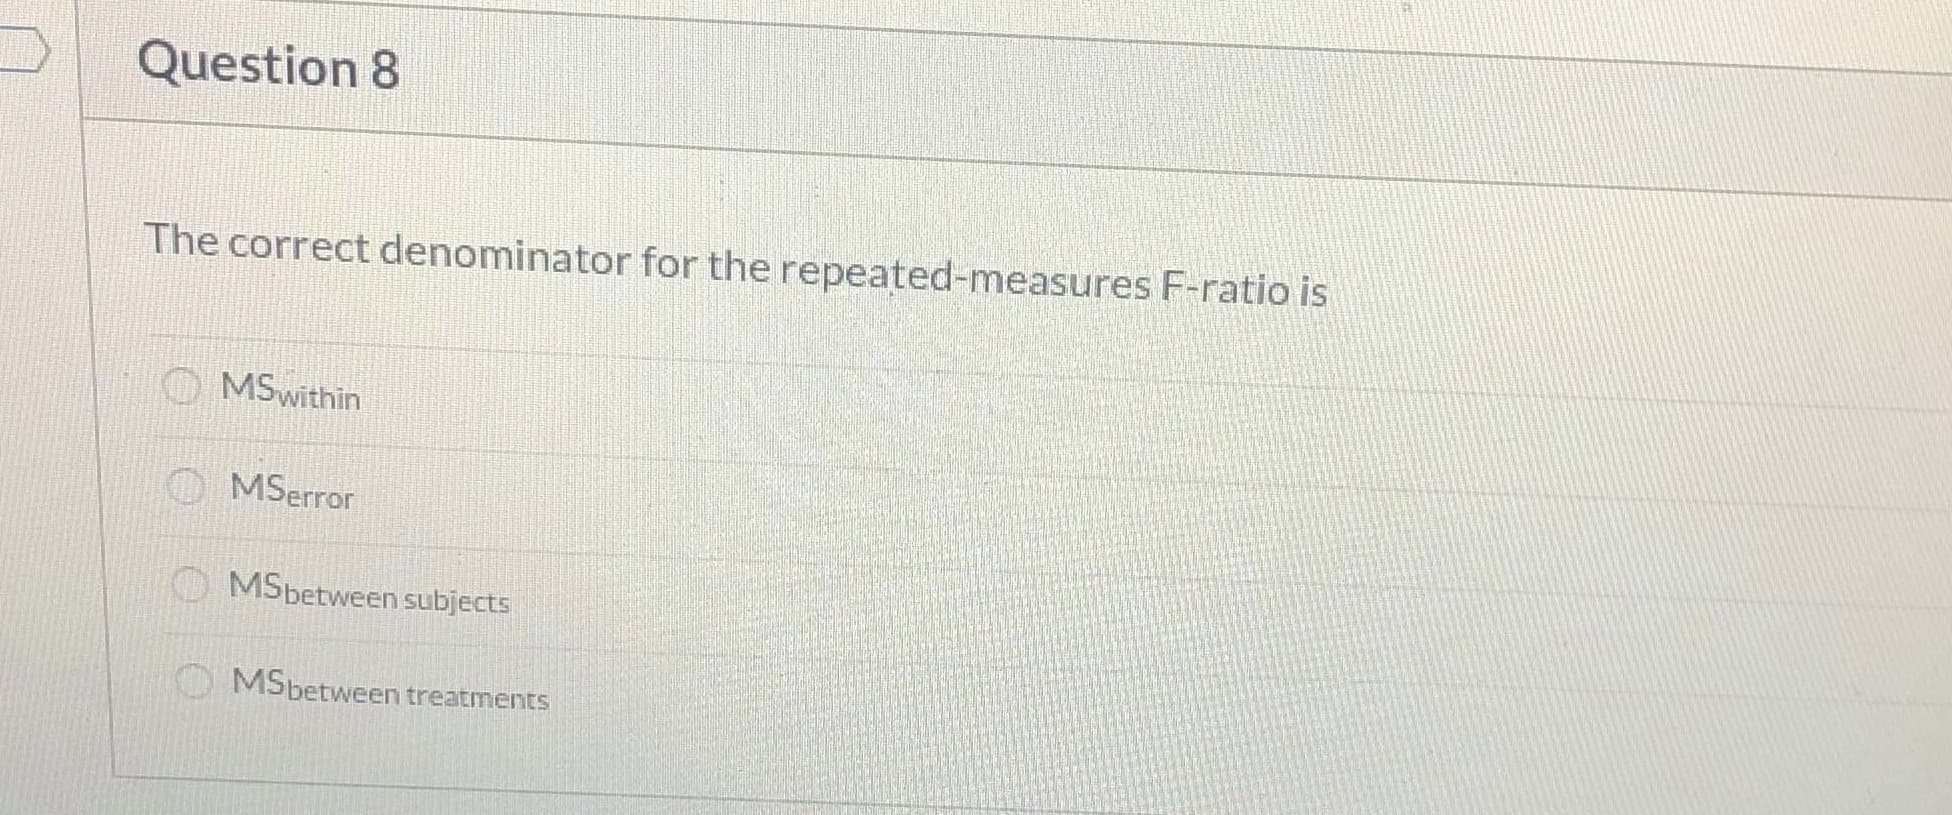 The correct denominator for the repeated-measures F-ratio is
